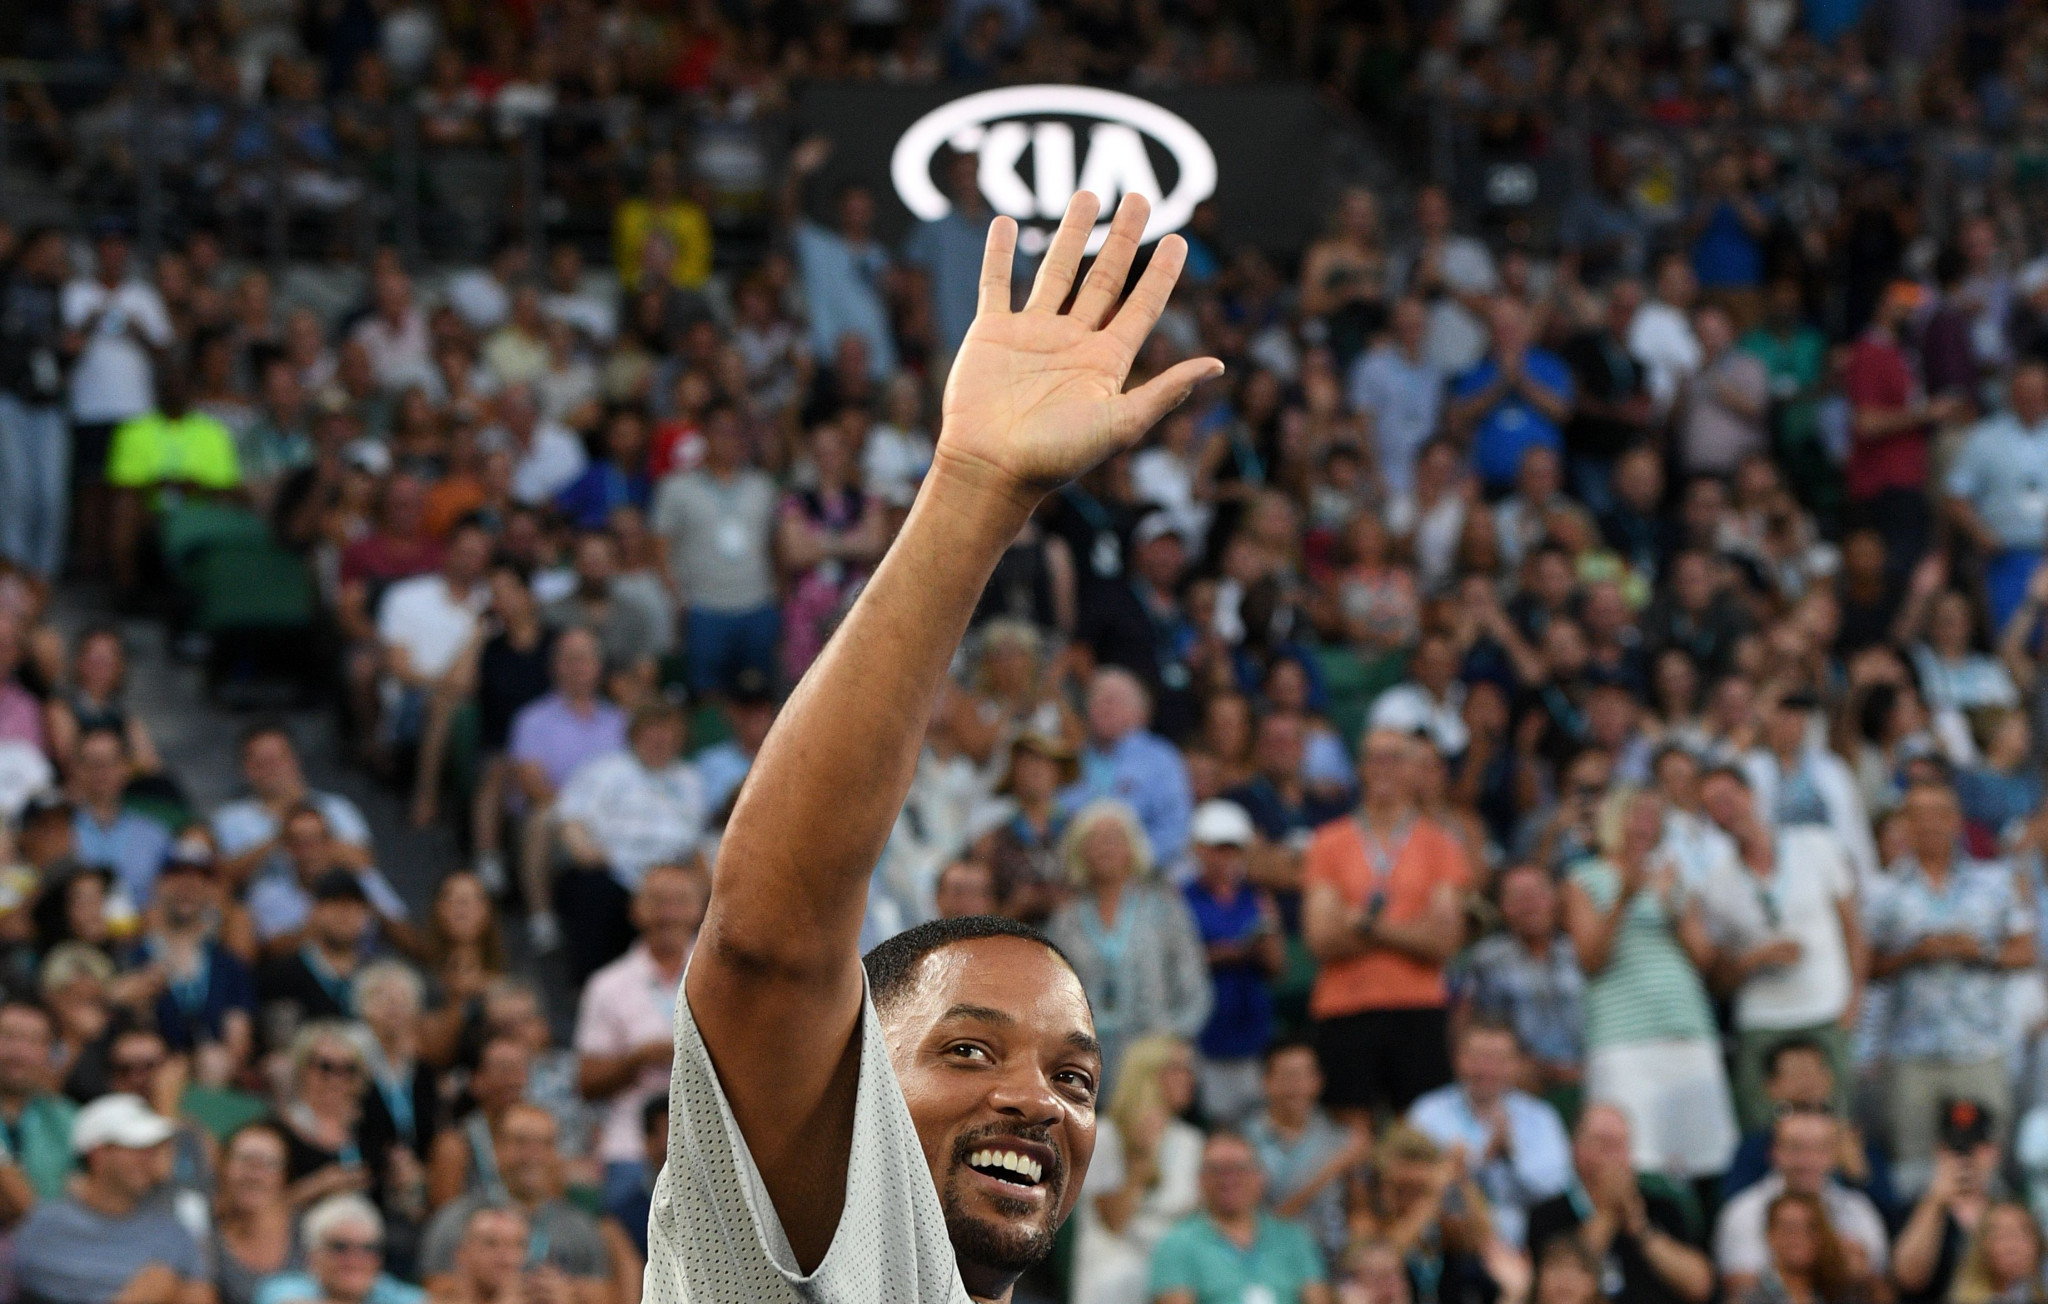 Actor Will Smith was in the crowd at the Australian Open ©Getty Images